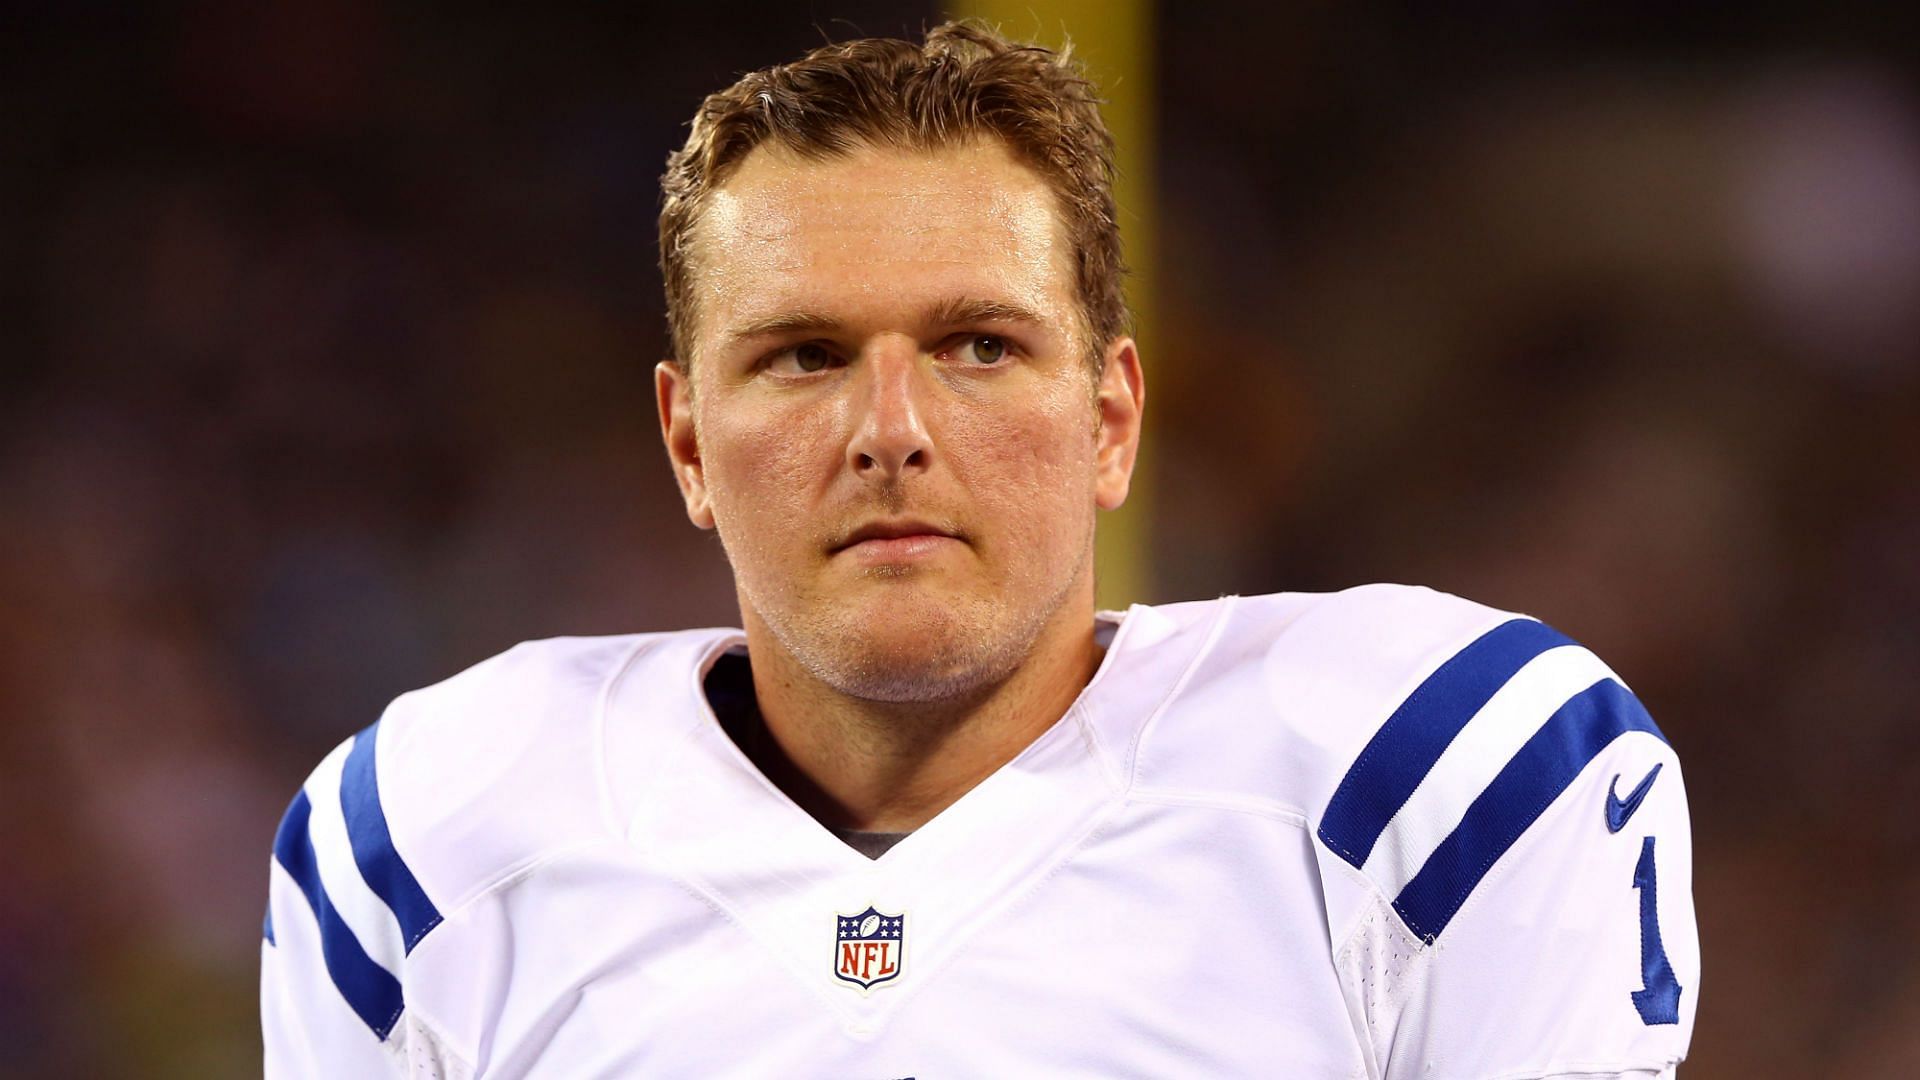 Who did WWE star Pat McAfee play for in the NFL?